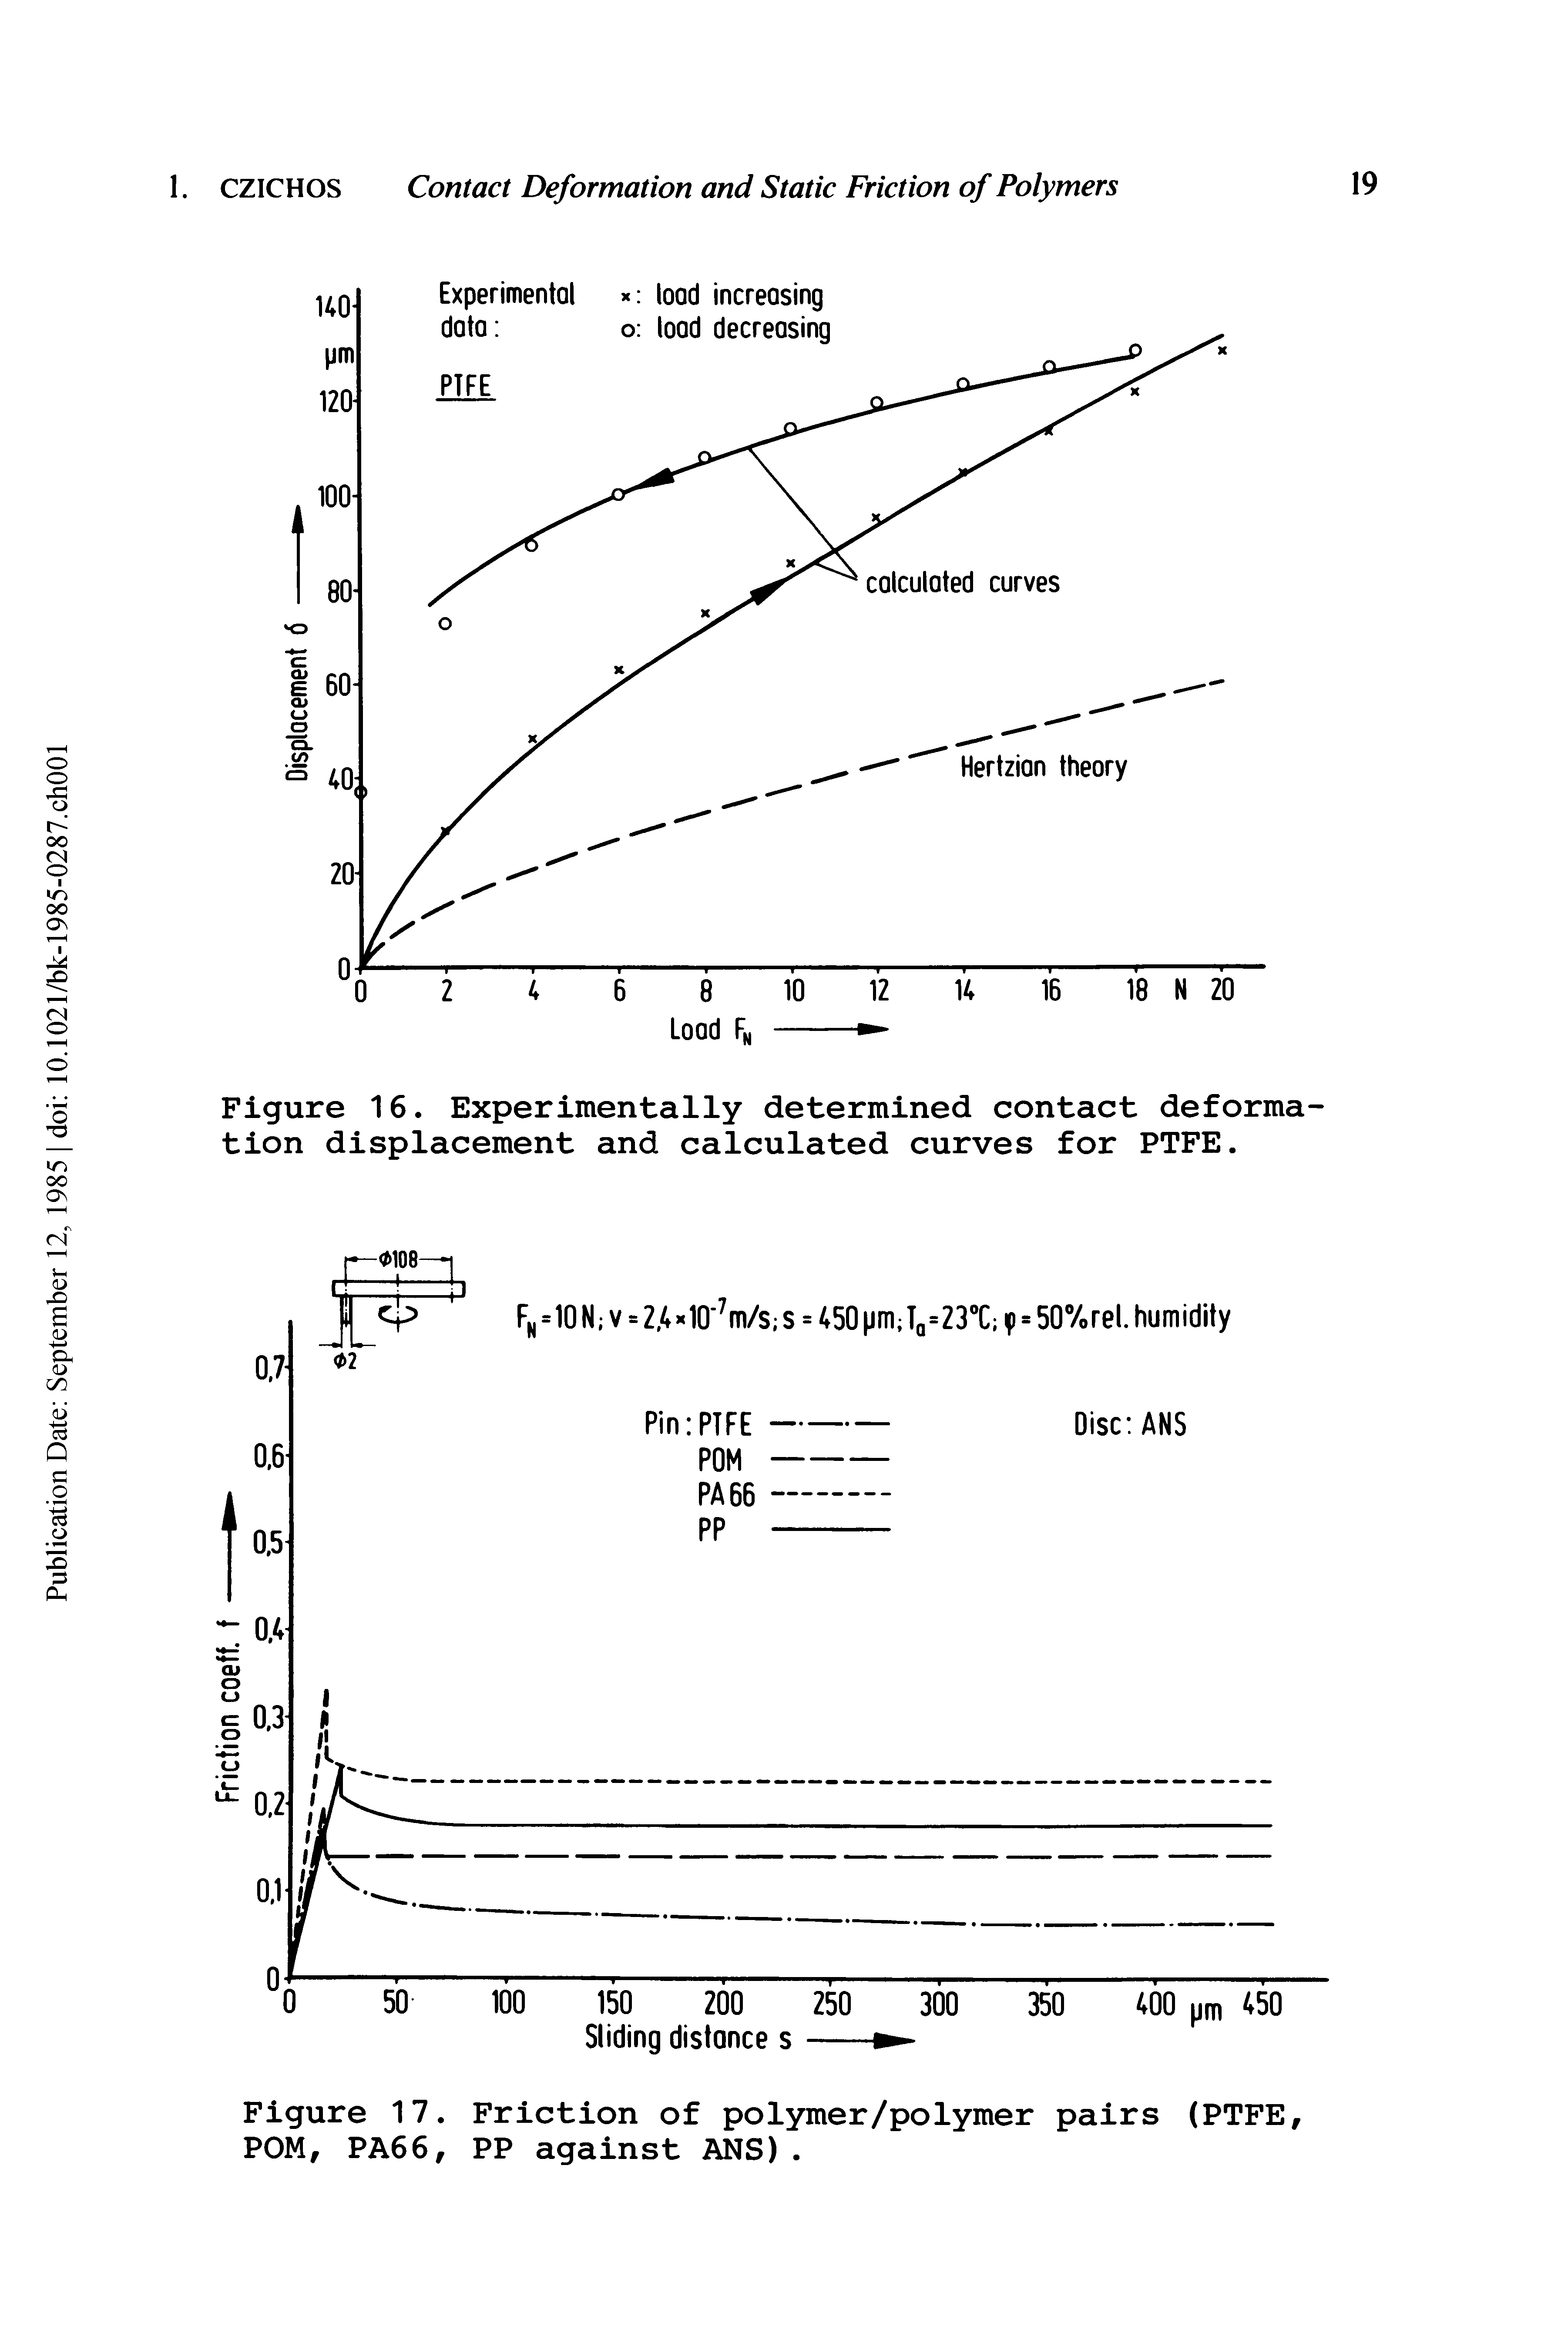 Figure 17. Friction of polymer/polymer pairs (PTFE, POM, PA66, PP against ANS).